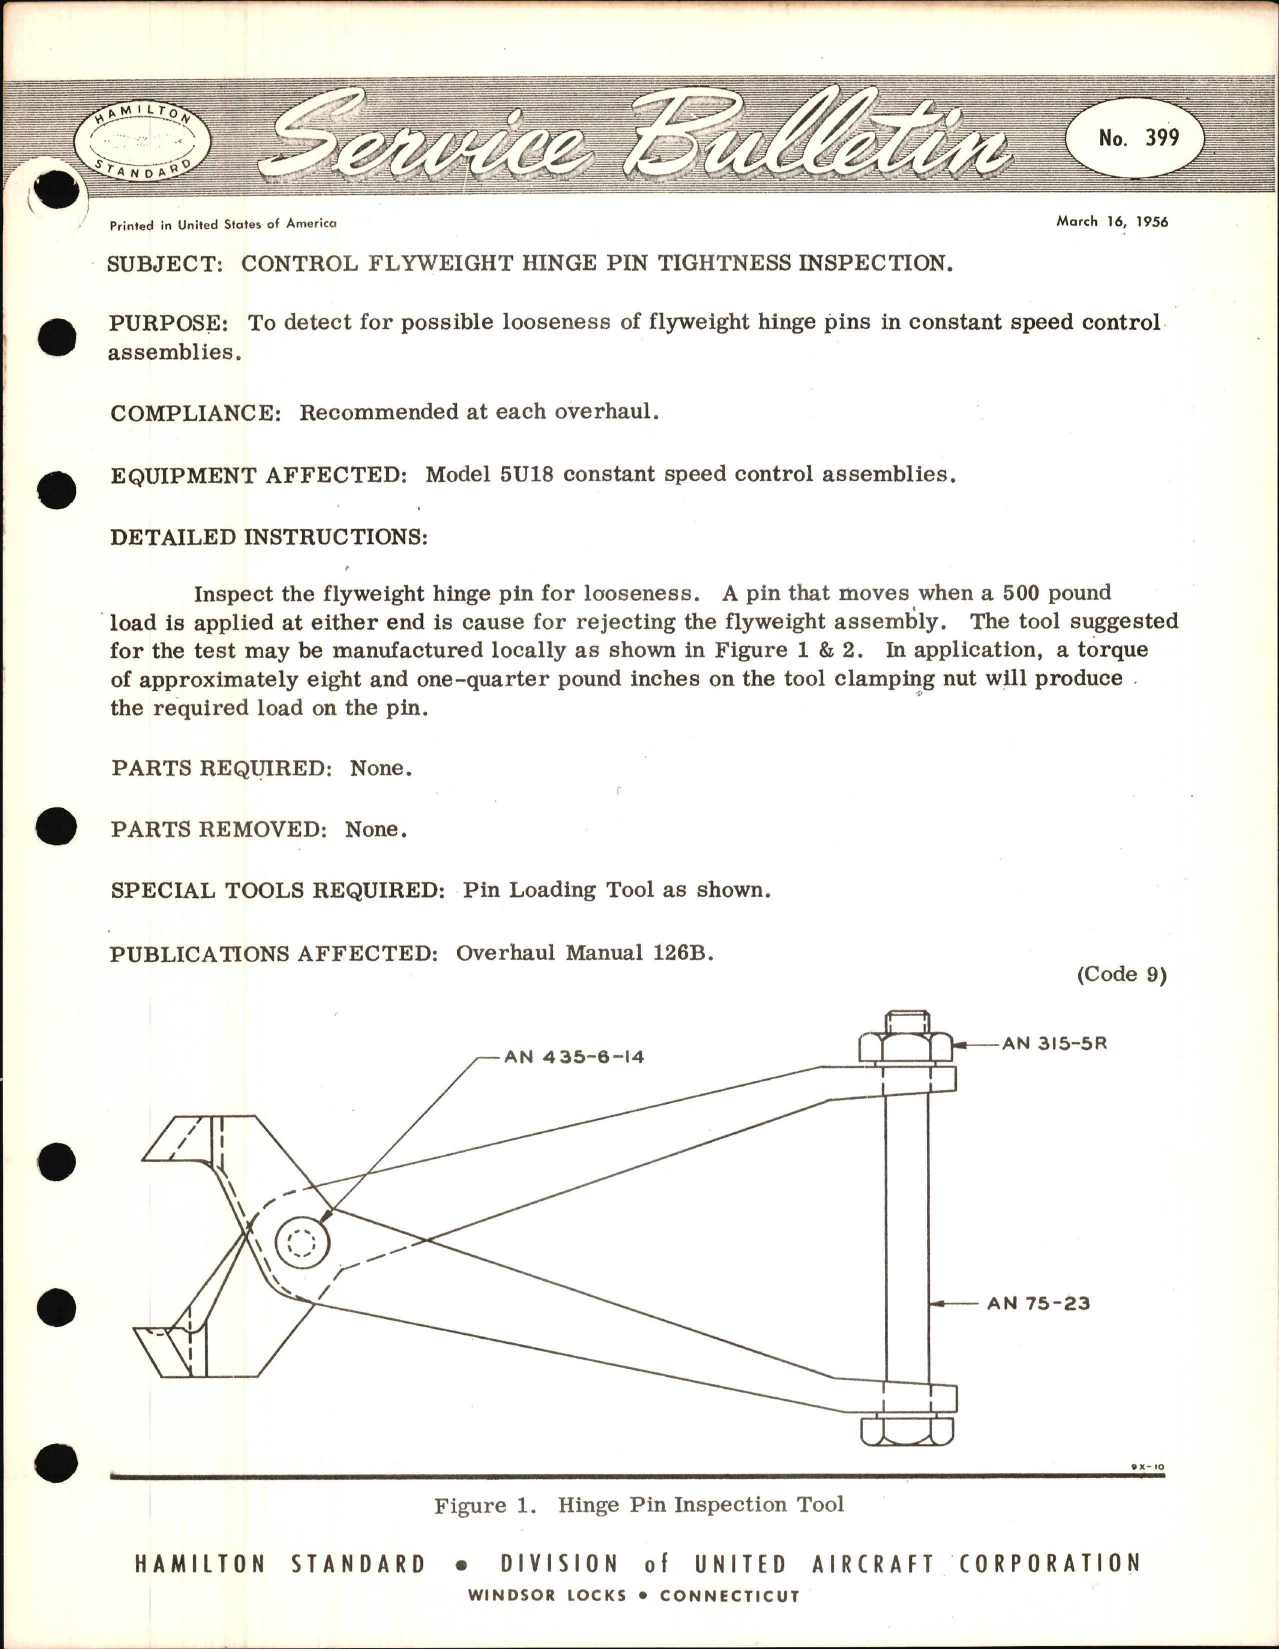 Sample page 1 from AirCorps Library document: Control Flyweight Hinge Pin Tightness Inspection